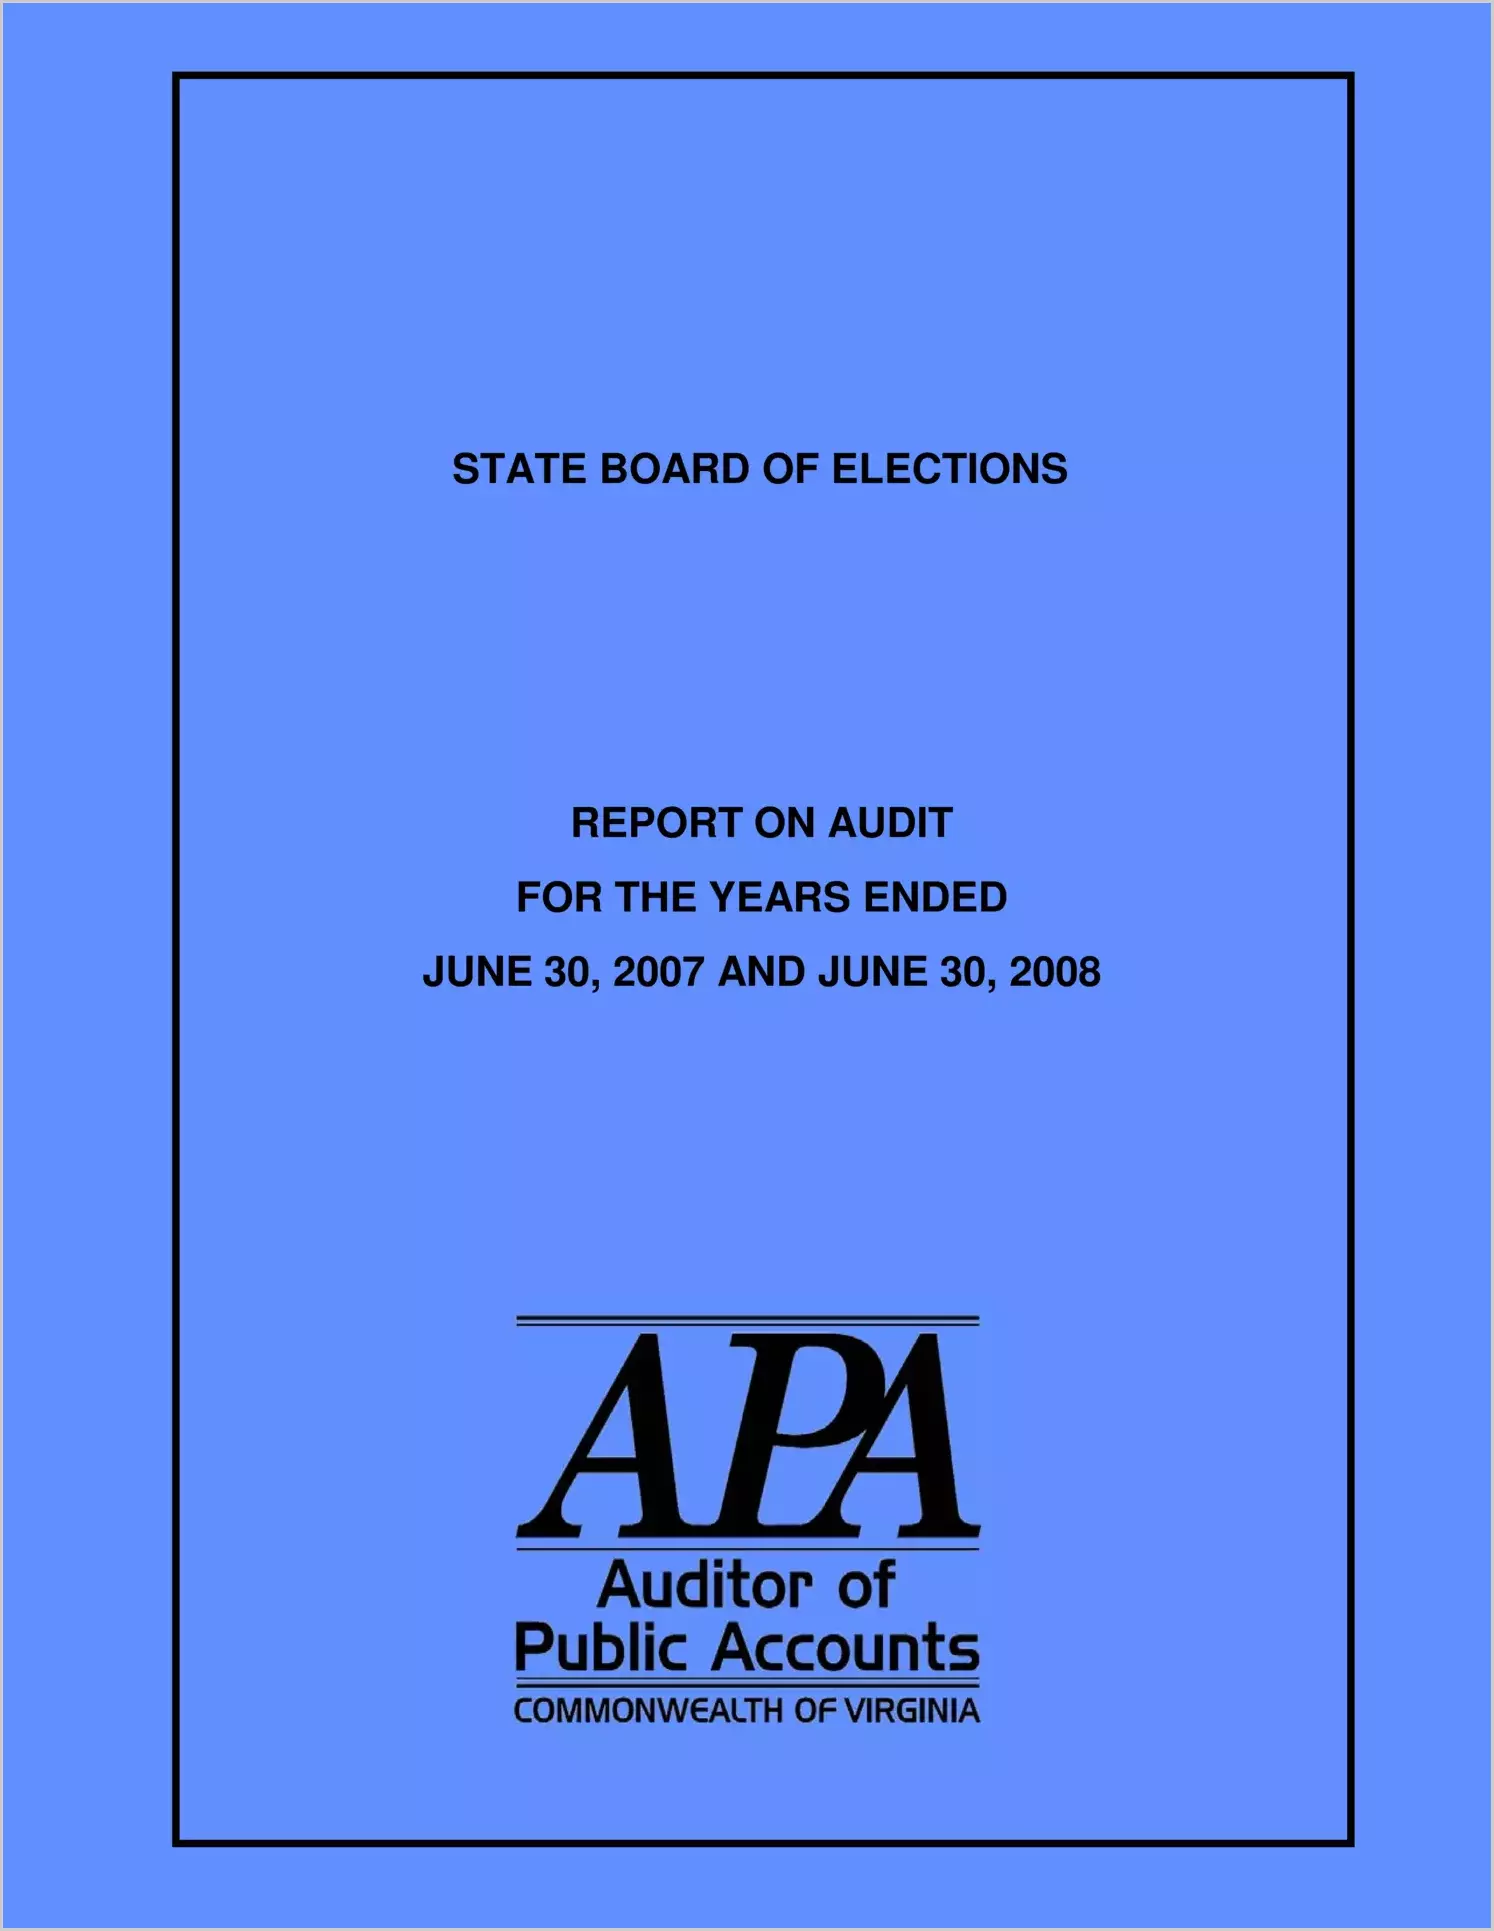 State Board of Elections For the years ended June 30, 2007 and June 30, 2008.